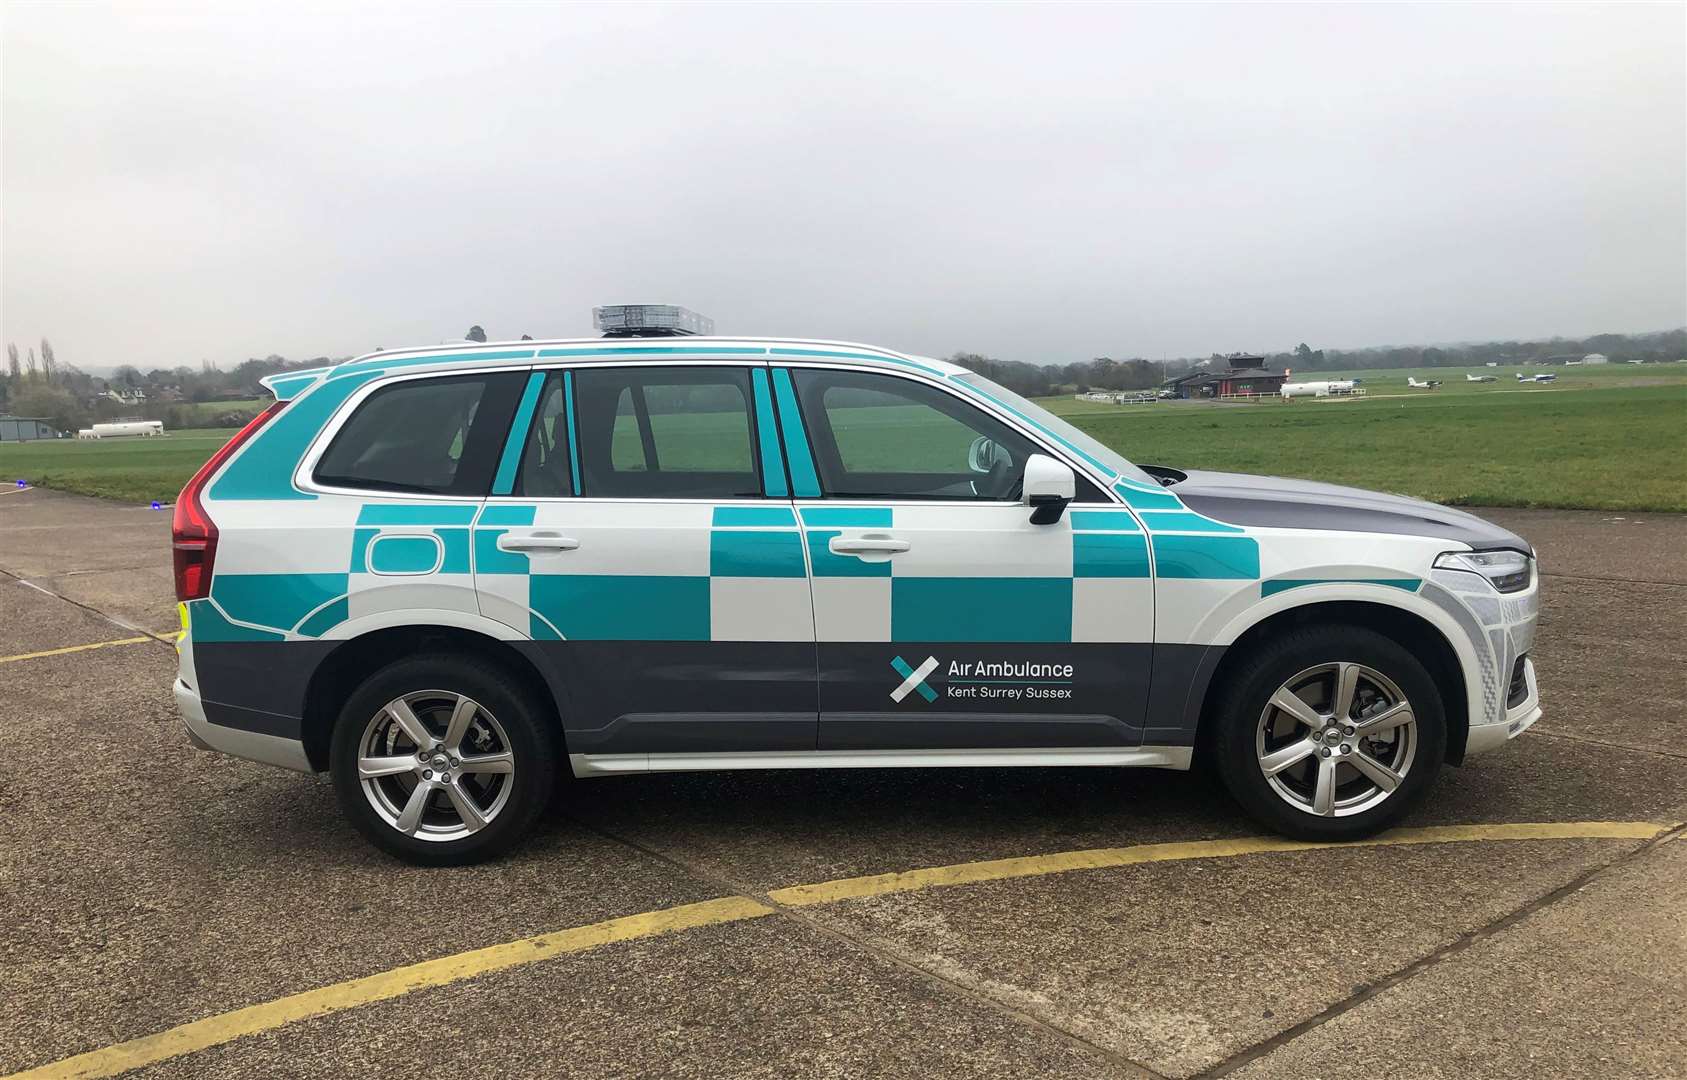 The new Kent Surrey and Sussex Air Ambulance Rapid Response Vehicle cost £35,000